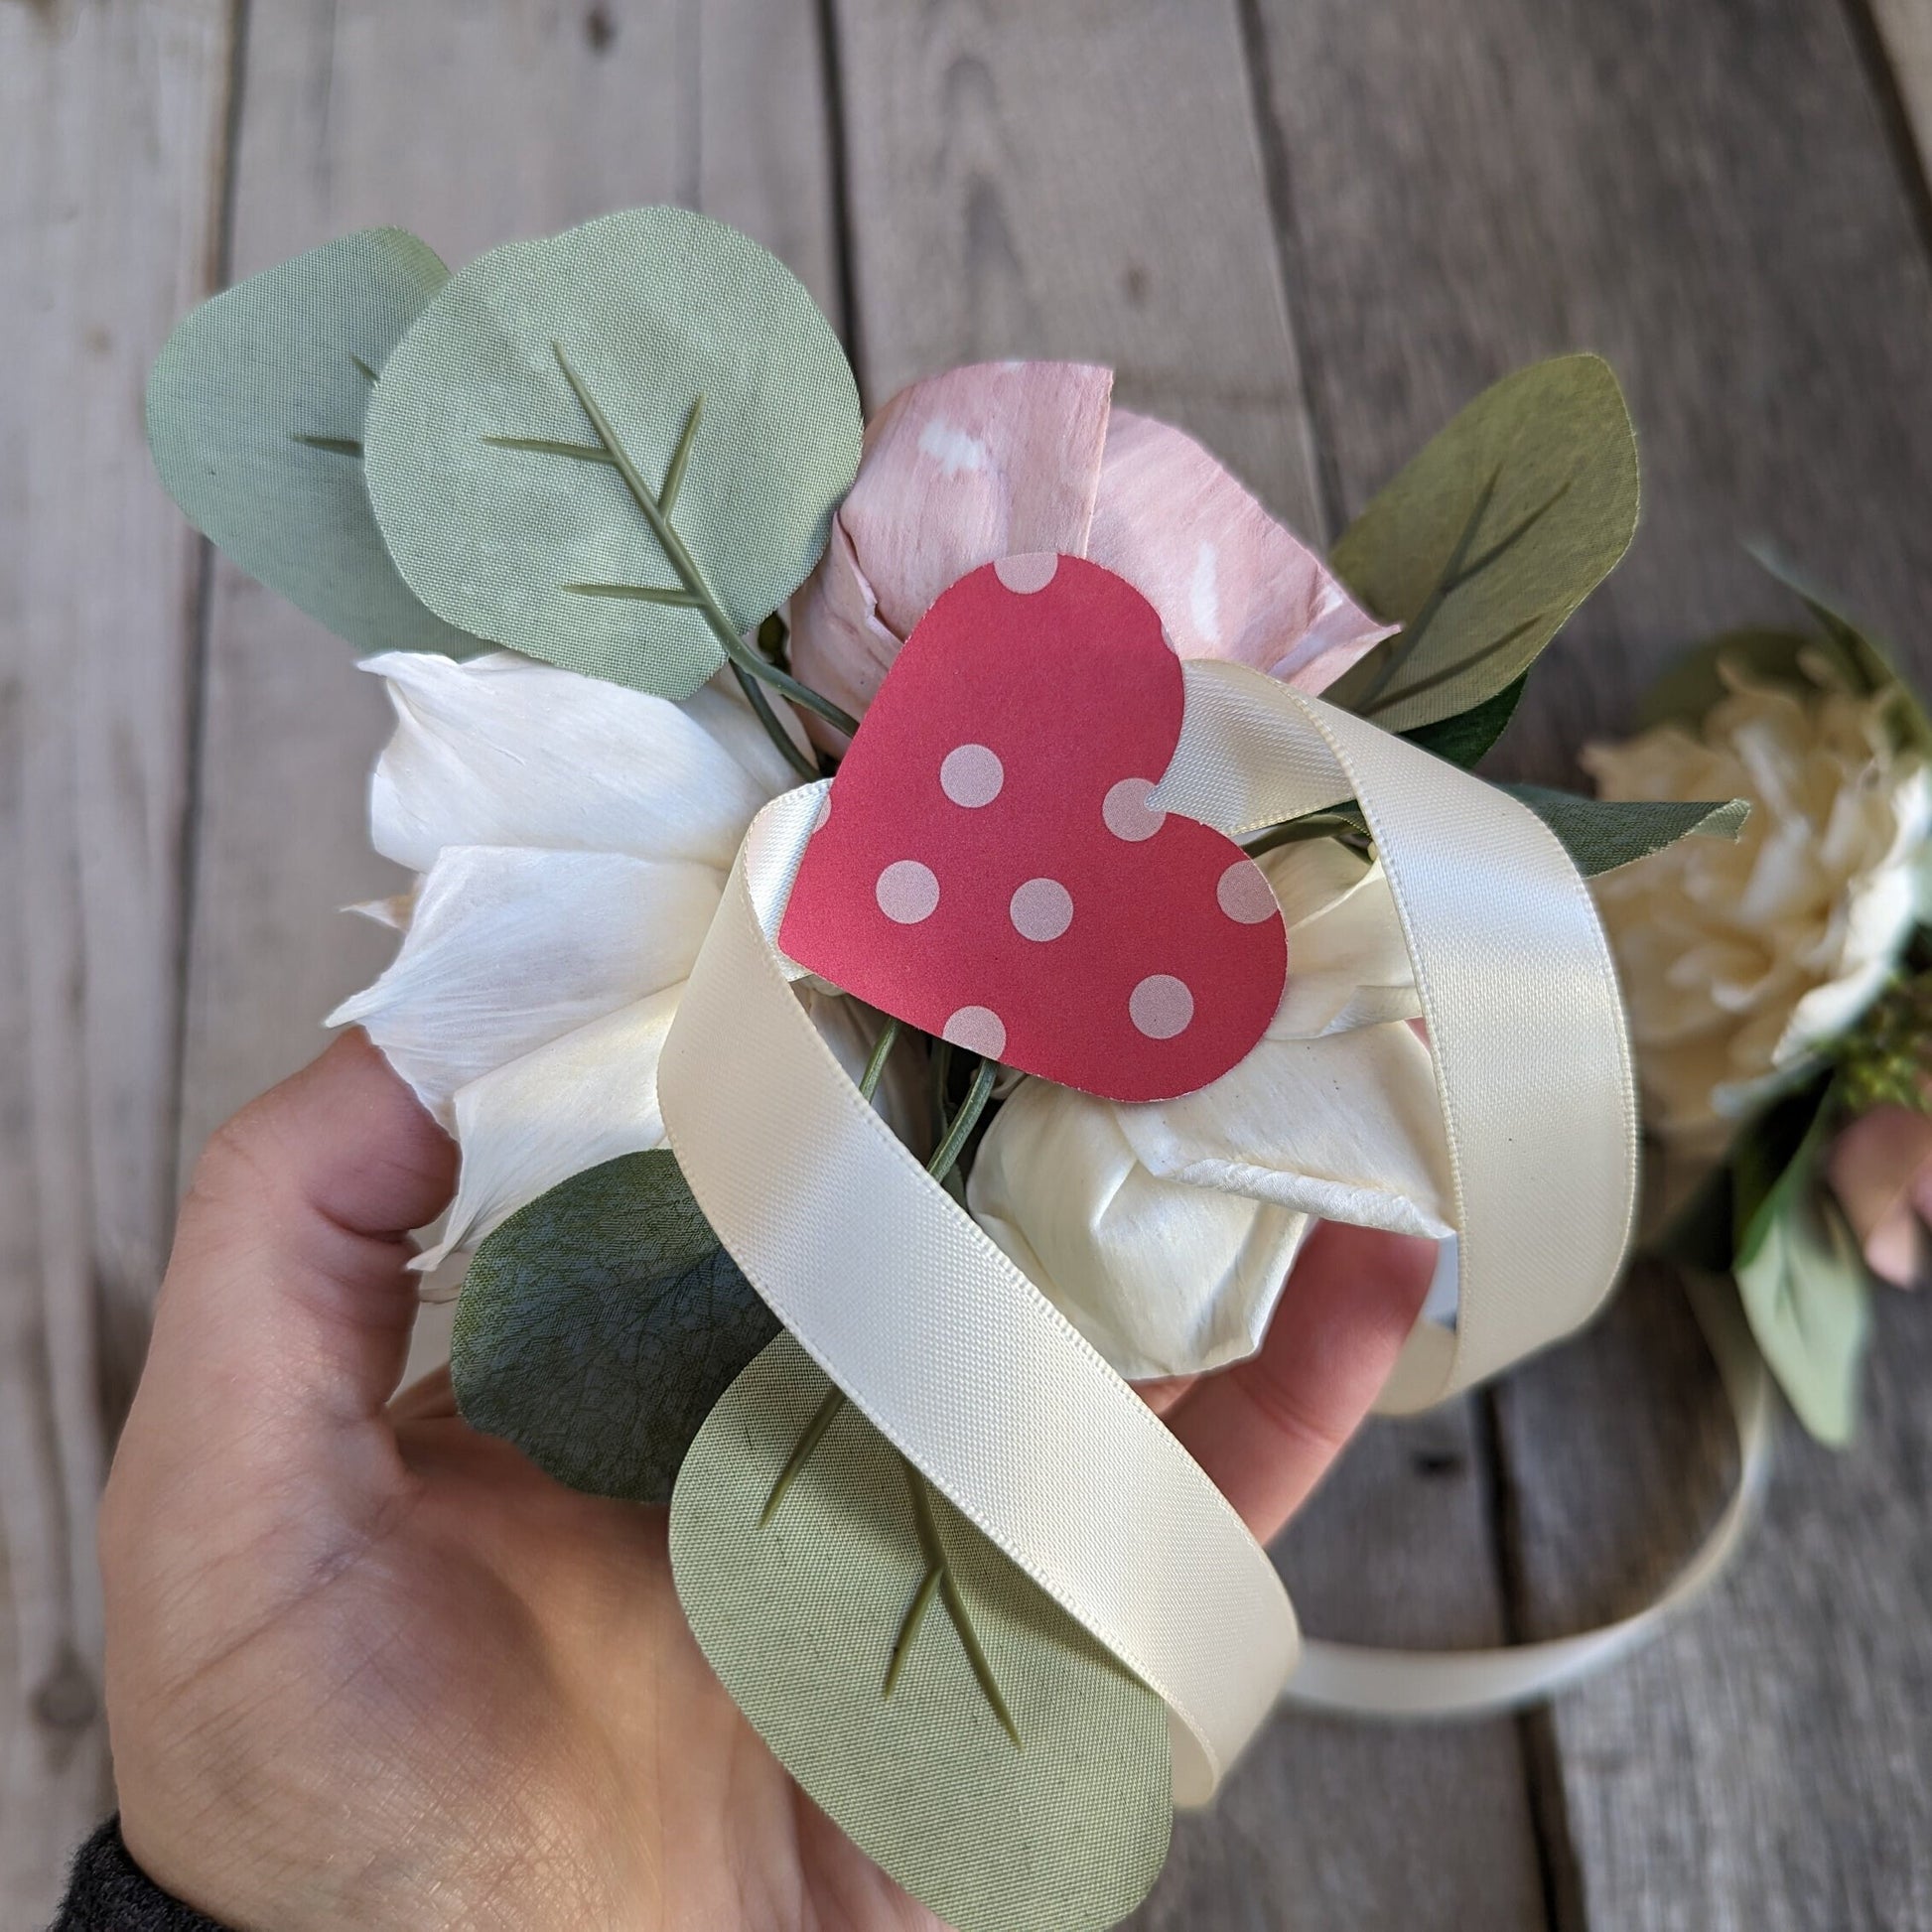 Wedding Wrist Corsage with Wood Flowers, Eucalyptus Wristlet, Wedding Corsage for Bridesmaids, Wooden Flowers Pinned Corsage